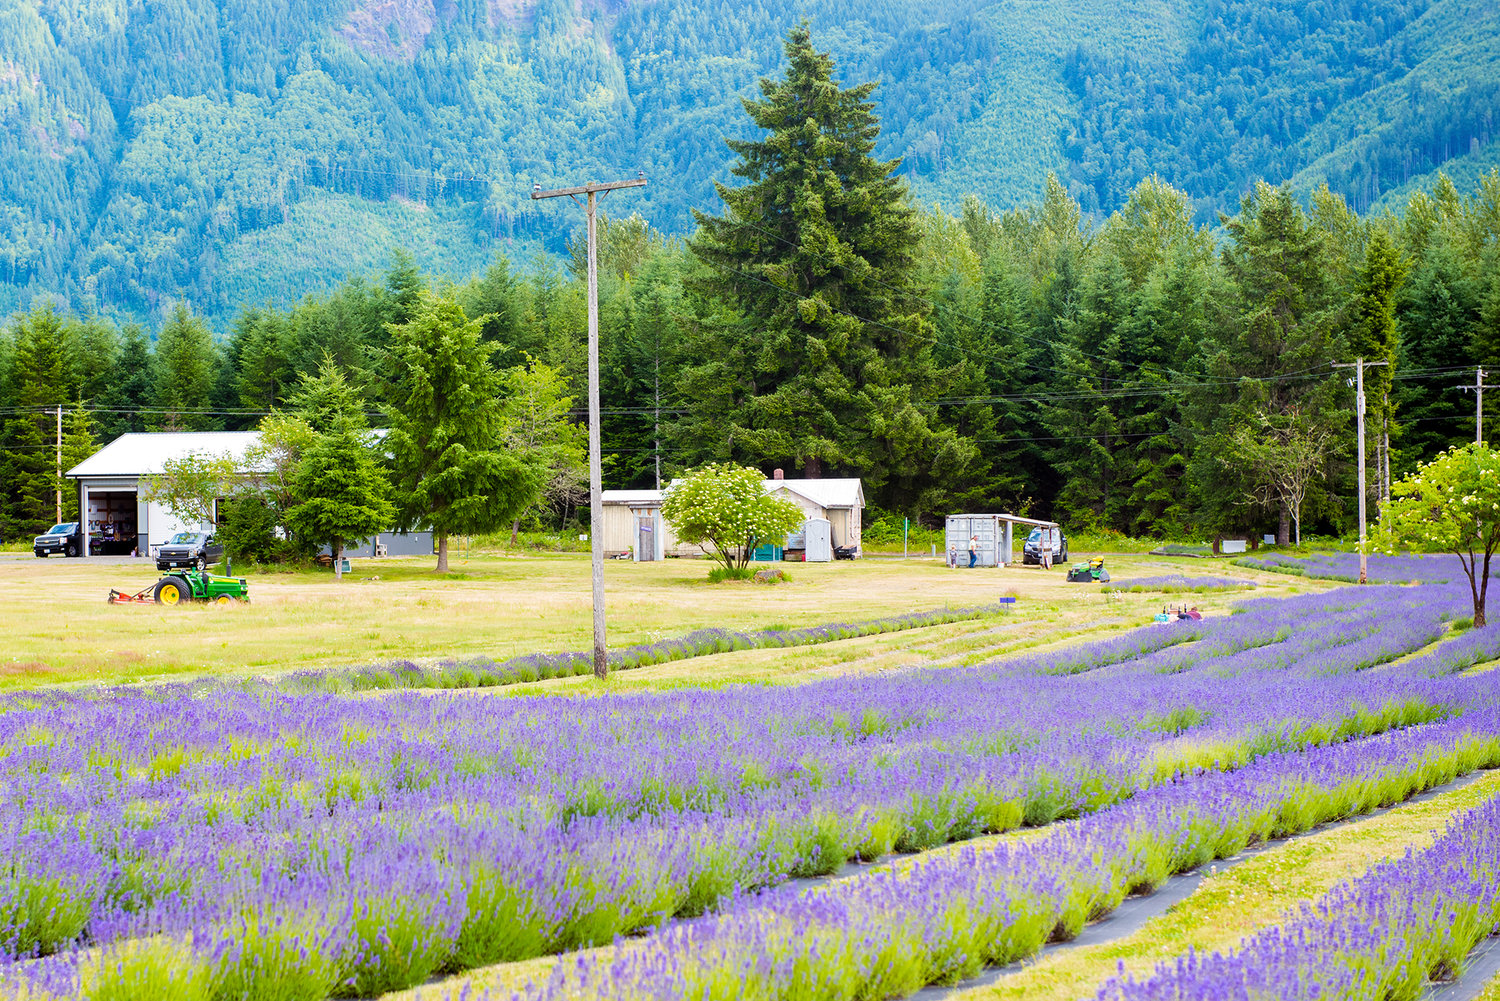 The Cowlitz Falls Lavender Farm in Randle as seen on Saturday afternoon.